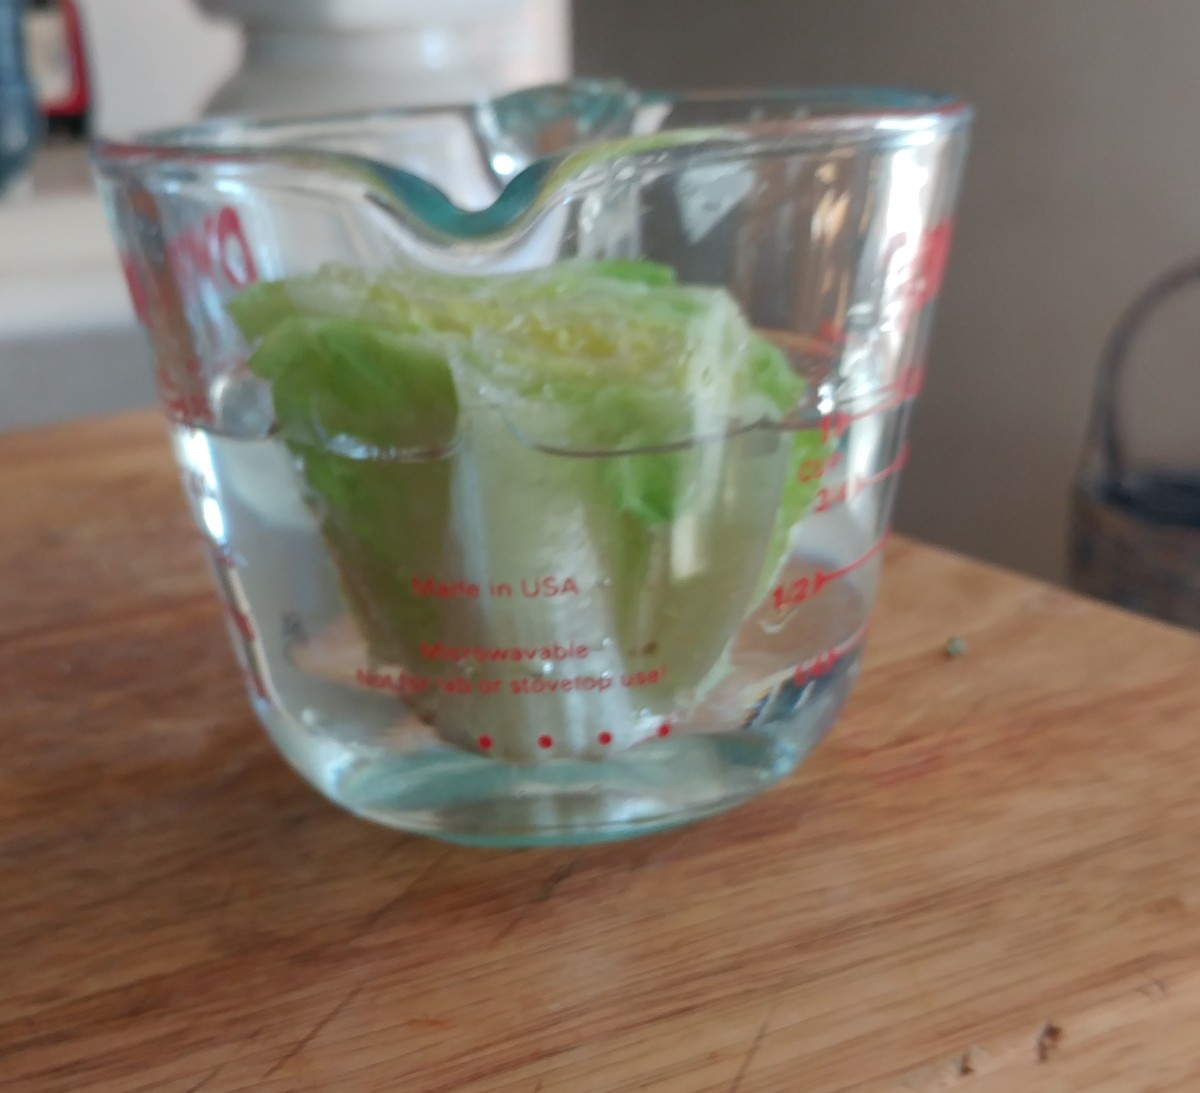 Soak the bottom of lettuce overnight to hydrate. Do not submerge, only the very bottom needs to soak.